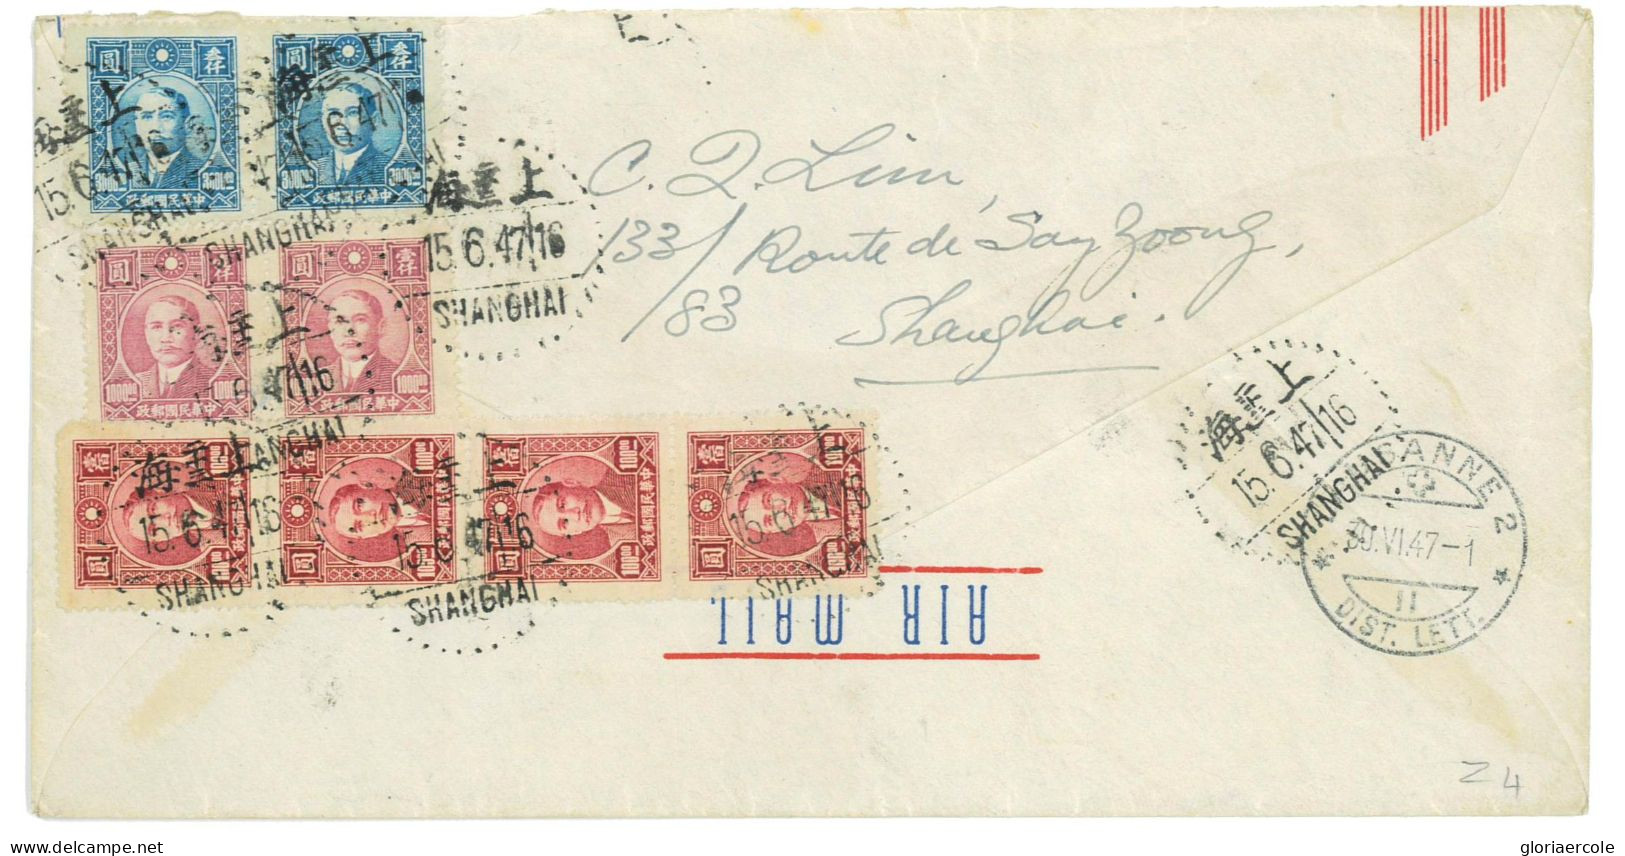 P2936 -CHINA , REGISTRED LETTER FROM SHANGAI TO SWITZERLAND, 1947 $ 8400 FRANKING. - 1912-1949 République